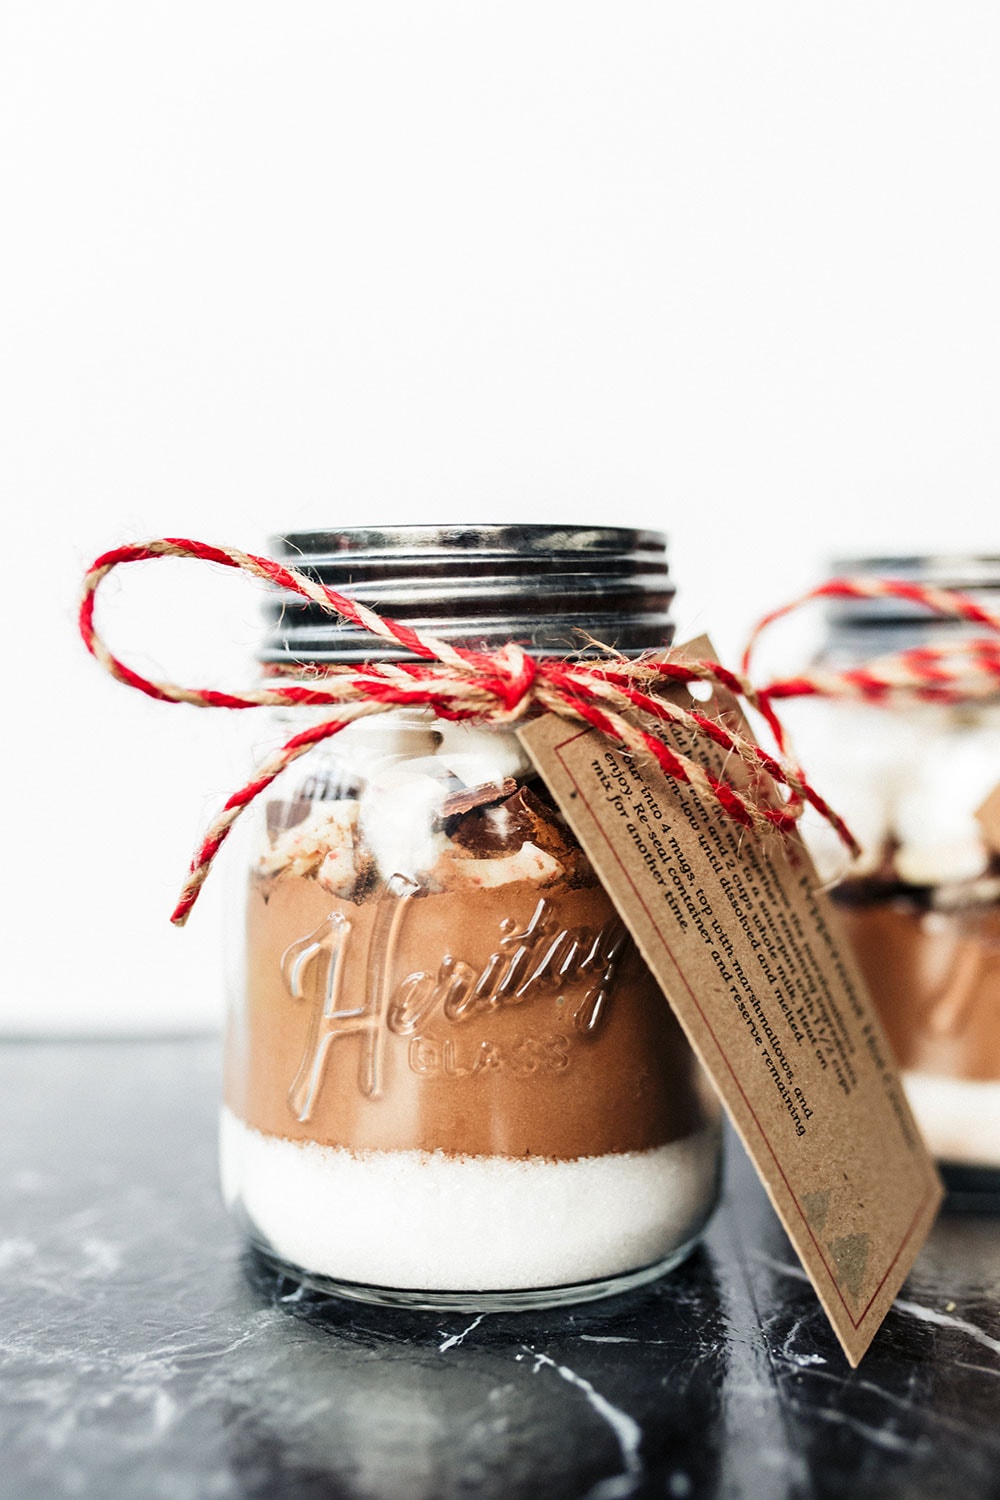 My recipe for homemade Peppermint Hot Cocoa is super easy yet flavorful and can be made into adorable DIY edible gifts. Printable recipe cards and gift tags included!